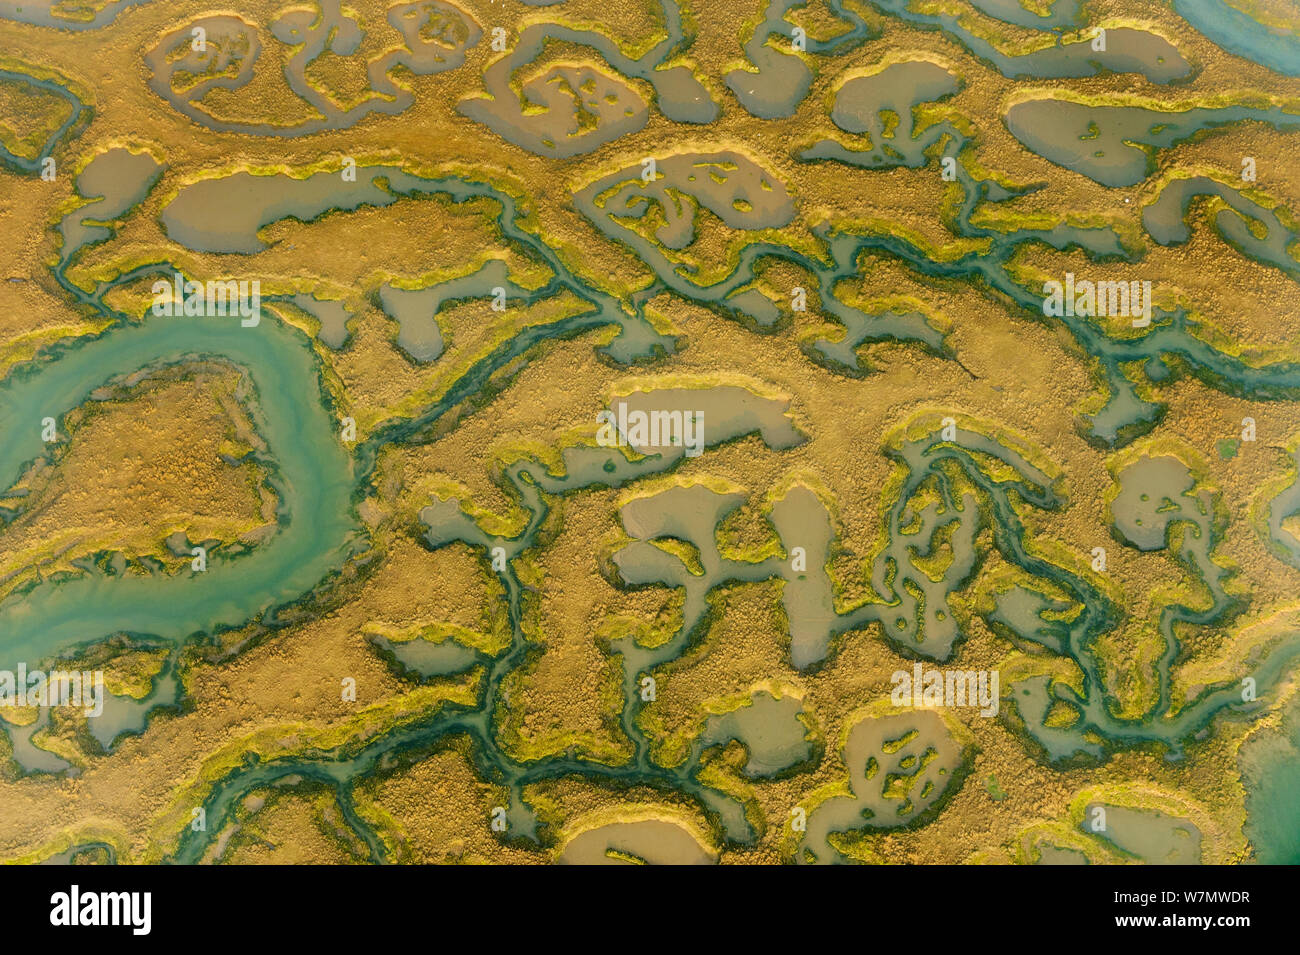 Water channels making patterns in saltmarsh, seen from the air. Abbotts Hall Farm, Essex, UK, April 2012. Stock Photo